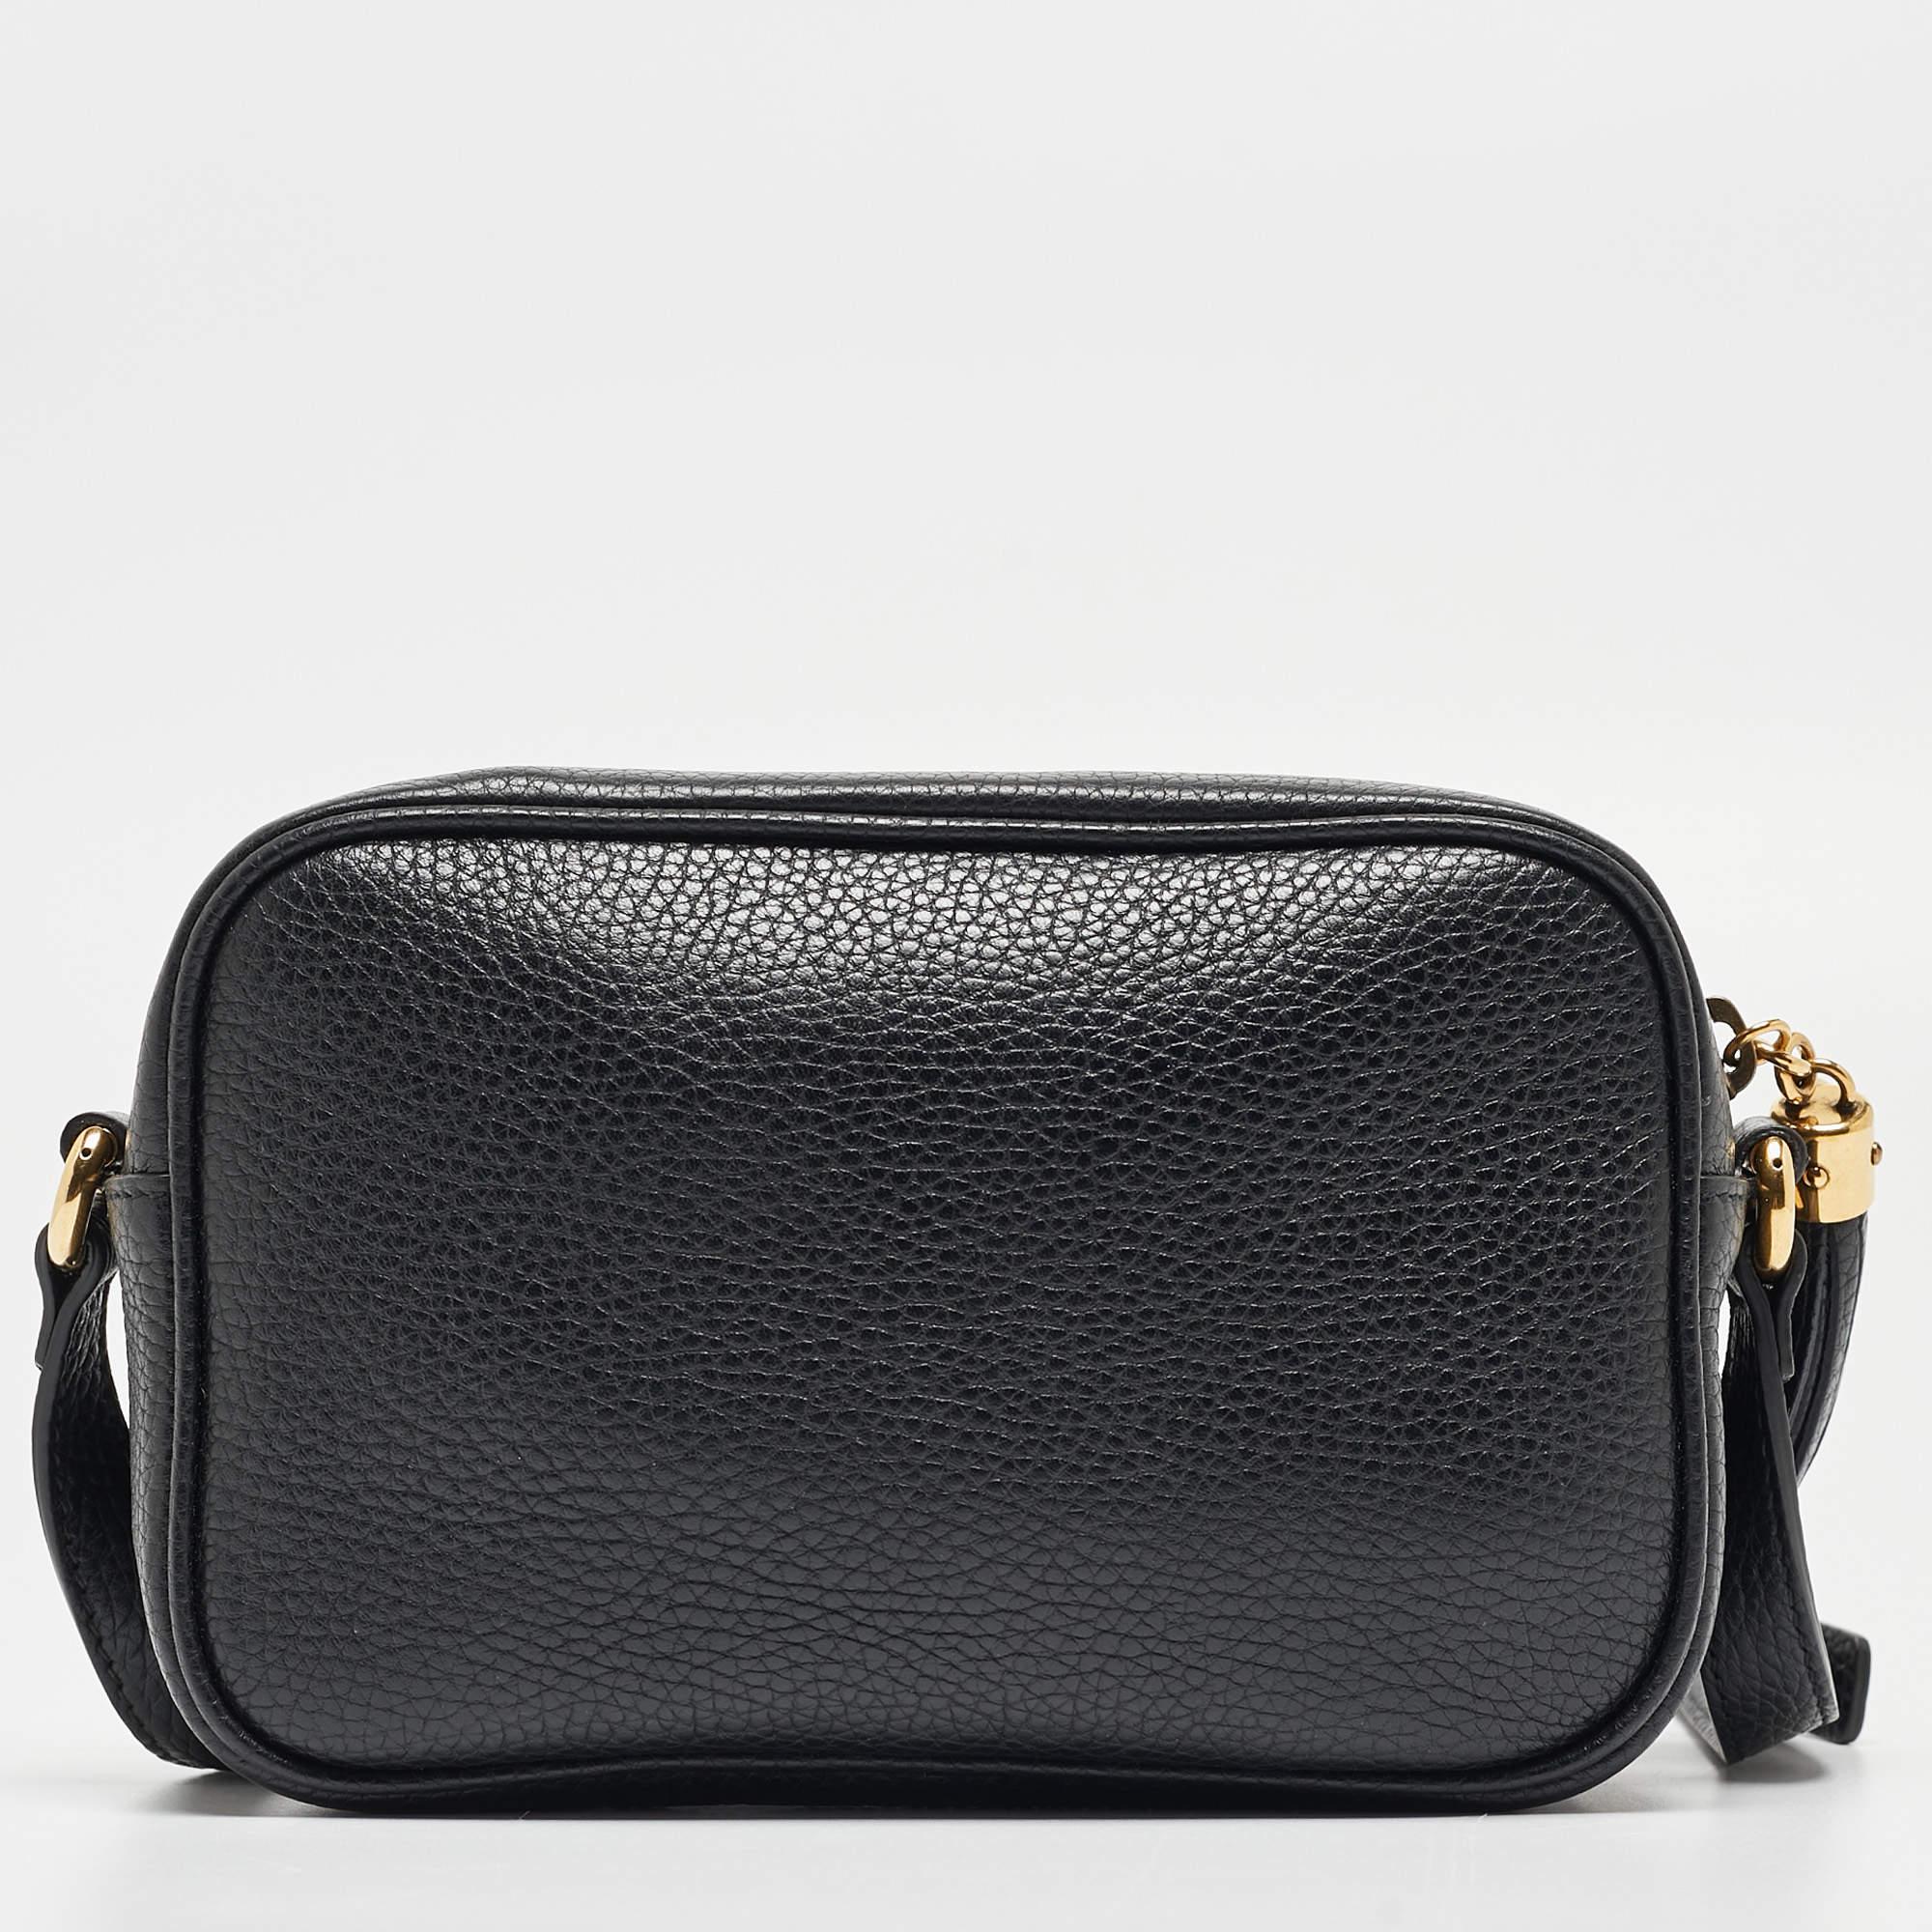 For a look that is complete with style, taste, and a touch of luxe, this Gucci Soho Disco shoulder bag is the perfect addition. Flaunt this beauty on your shoulder at any event and revel in the taste of luxury it leaves you with.

Includes: Info